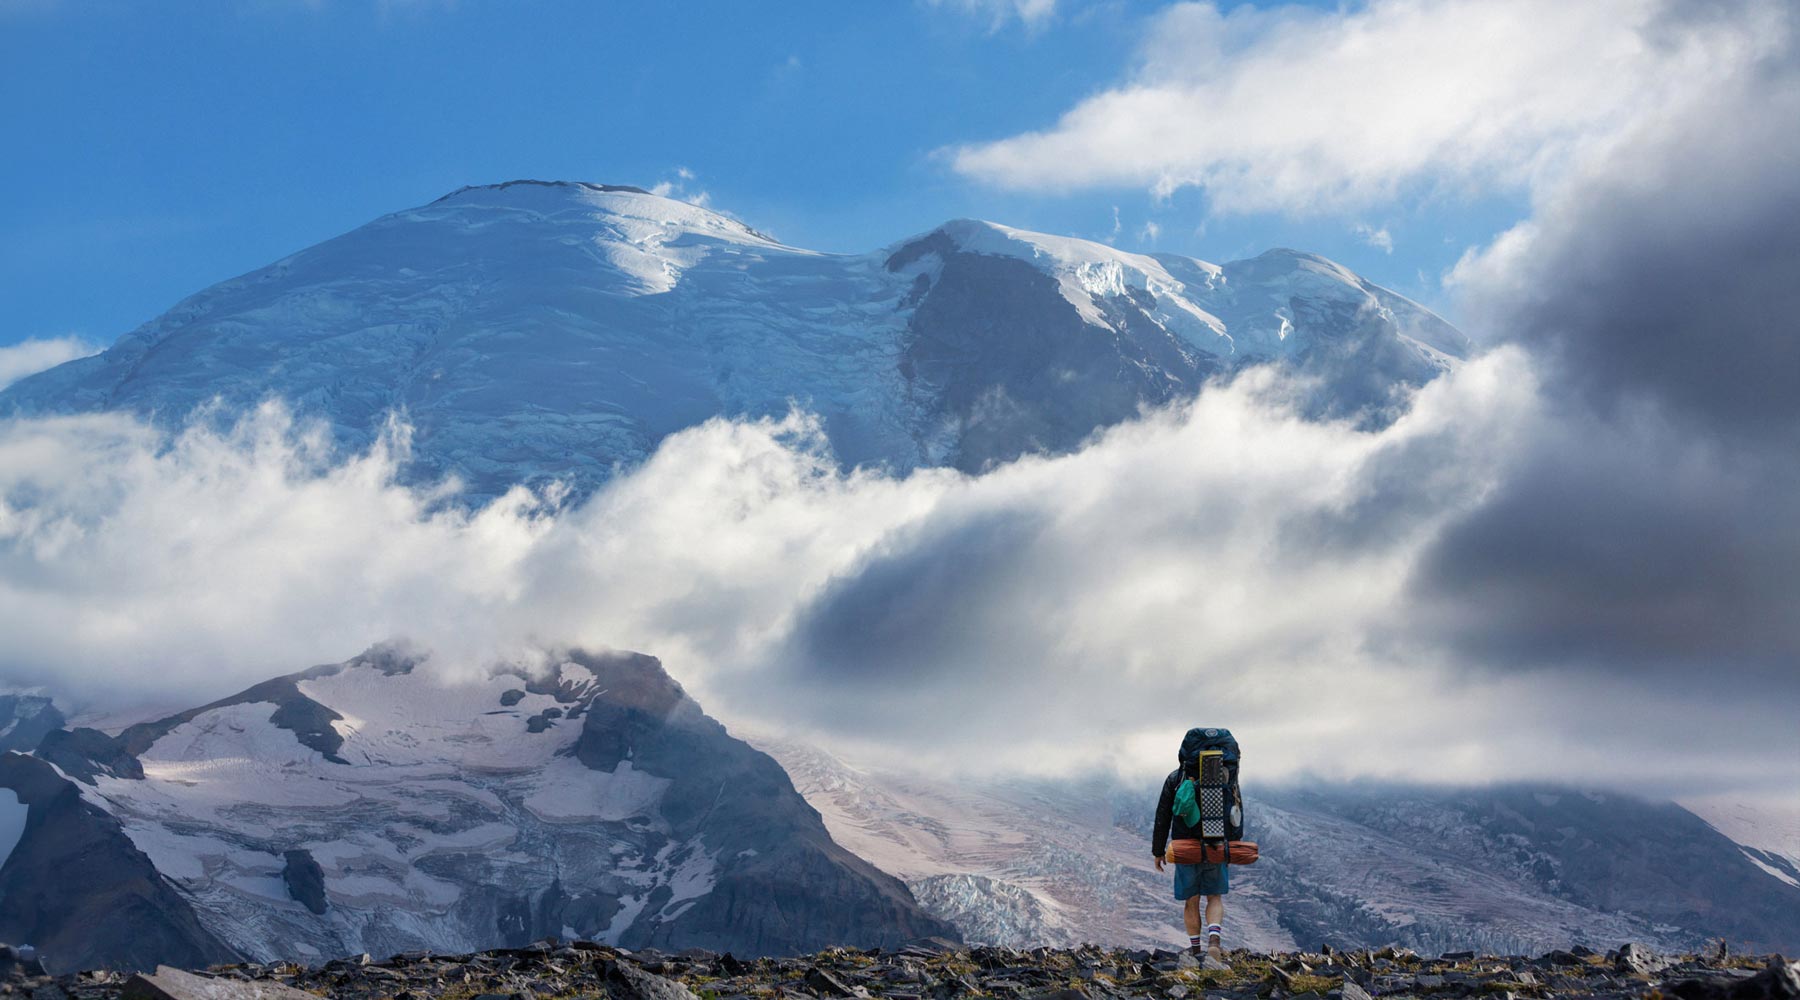 Backpacker wearing Cloudline socks looking at snowcapped mountain.